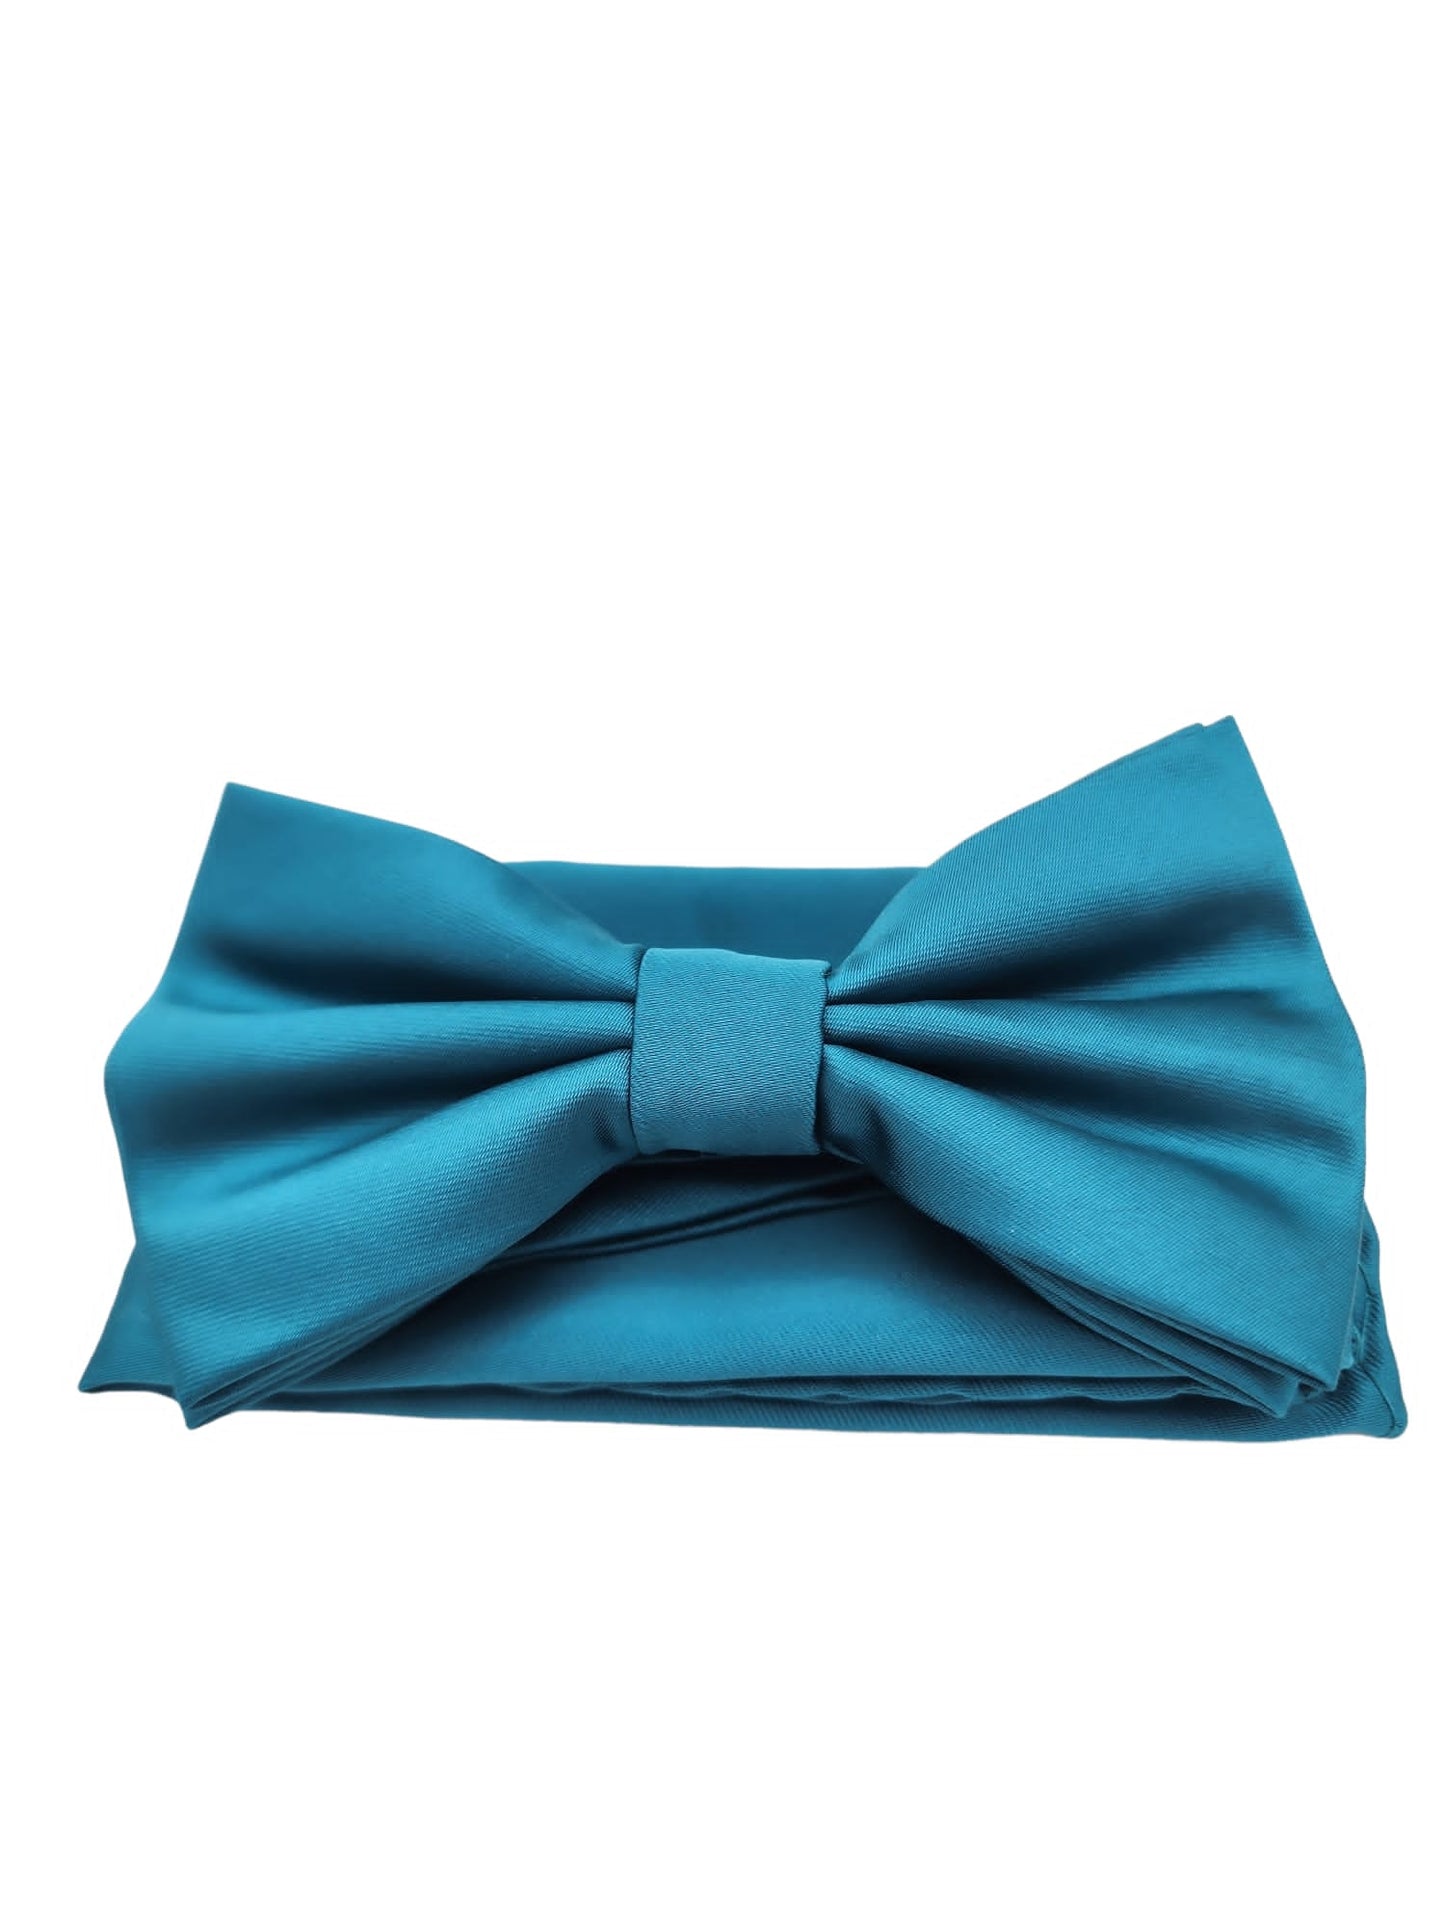 Giovanni Testi Classic Teal Bow Tie with Hanky BT100-BB